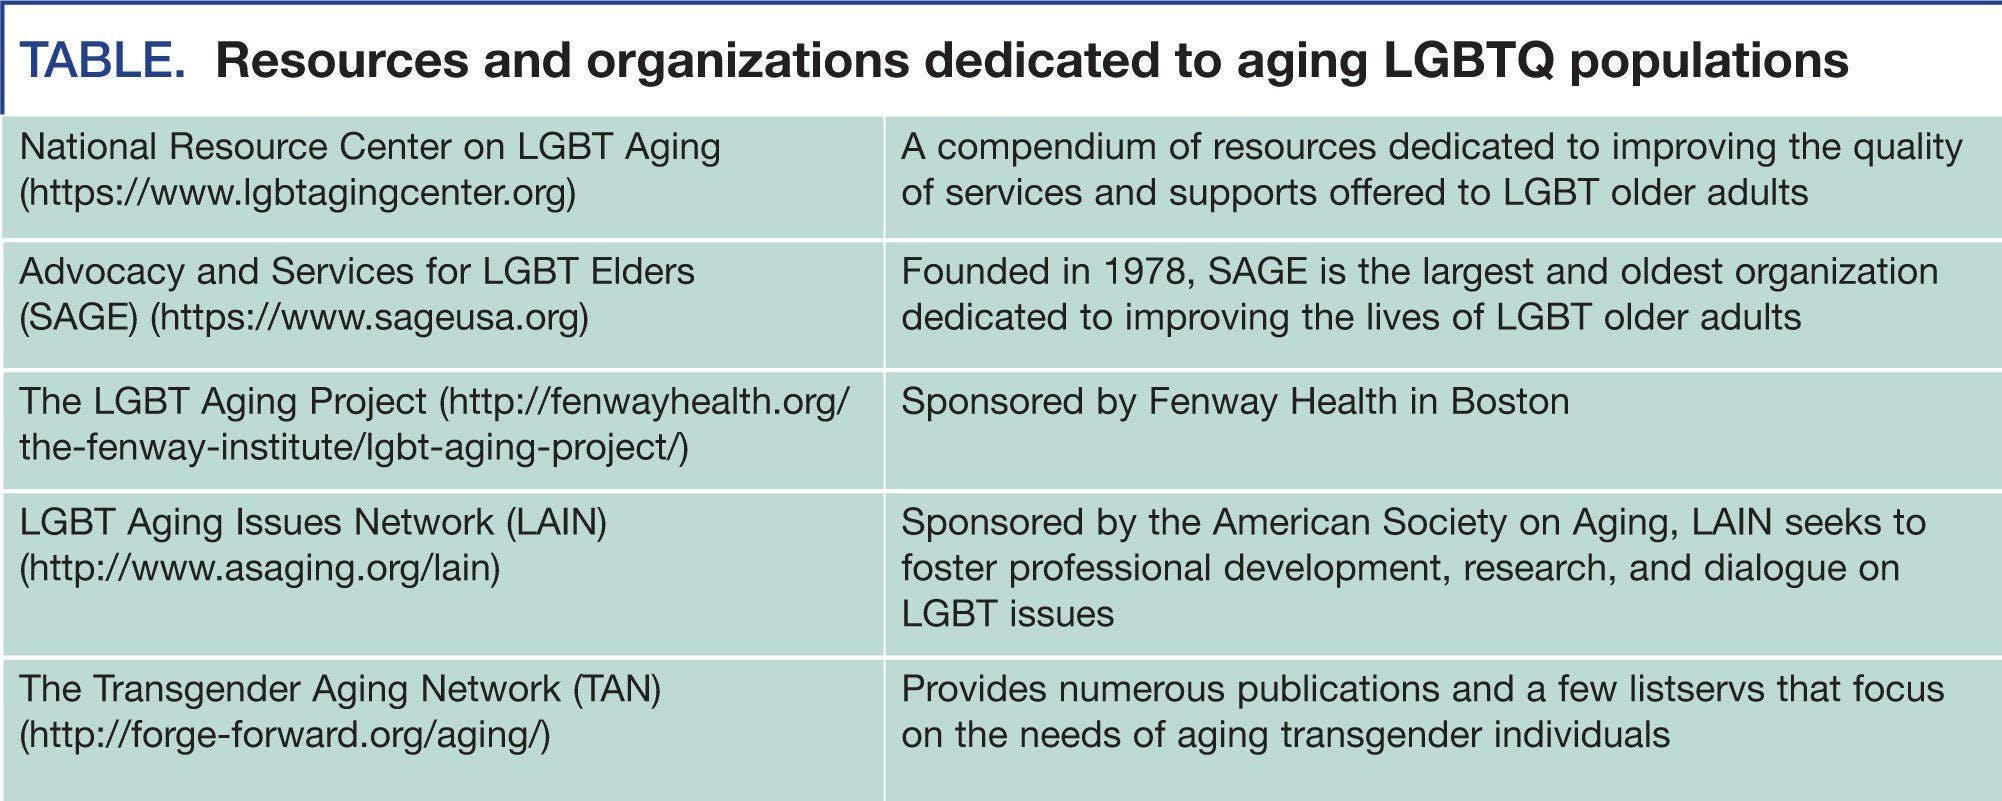 Resources and organizations dedicated to aging LGBTQ populations